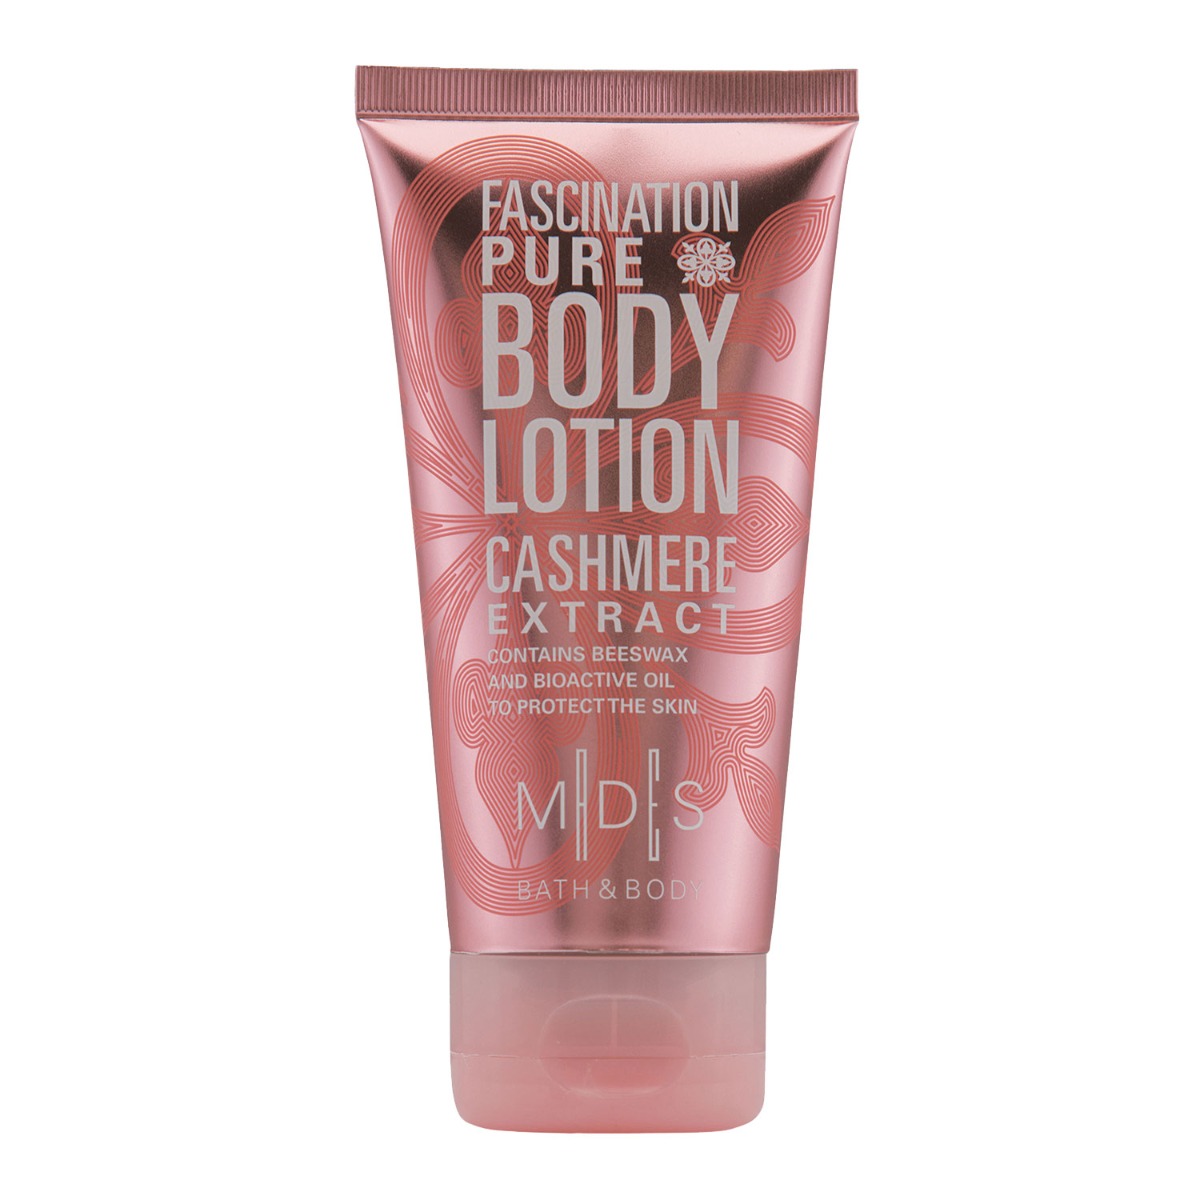 MADES Bath & Body Fascination Pure Body Lotion Pale Pink, 150ml